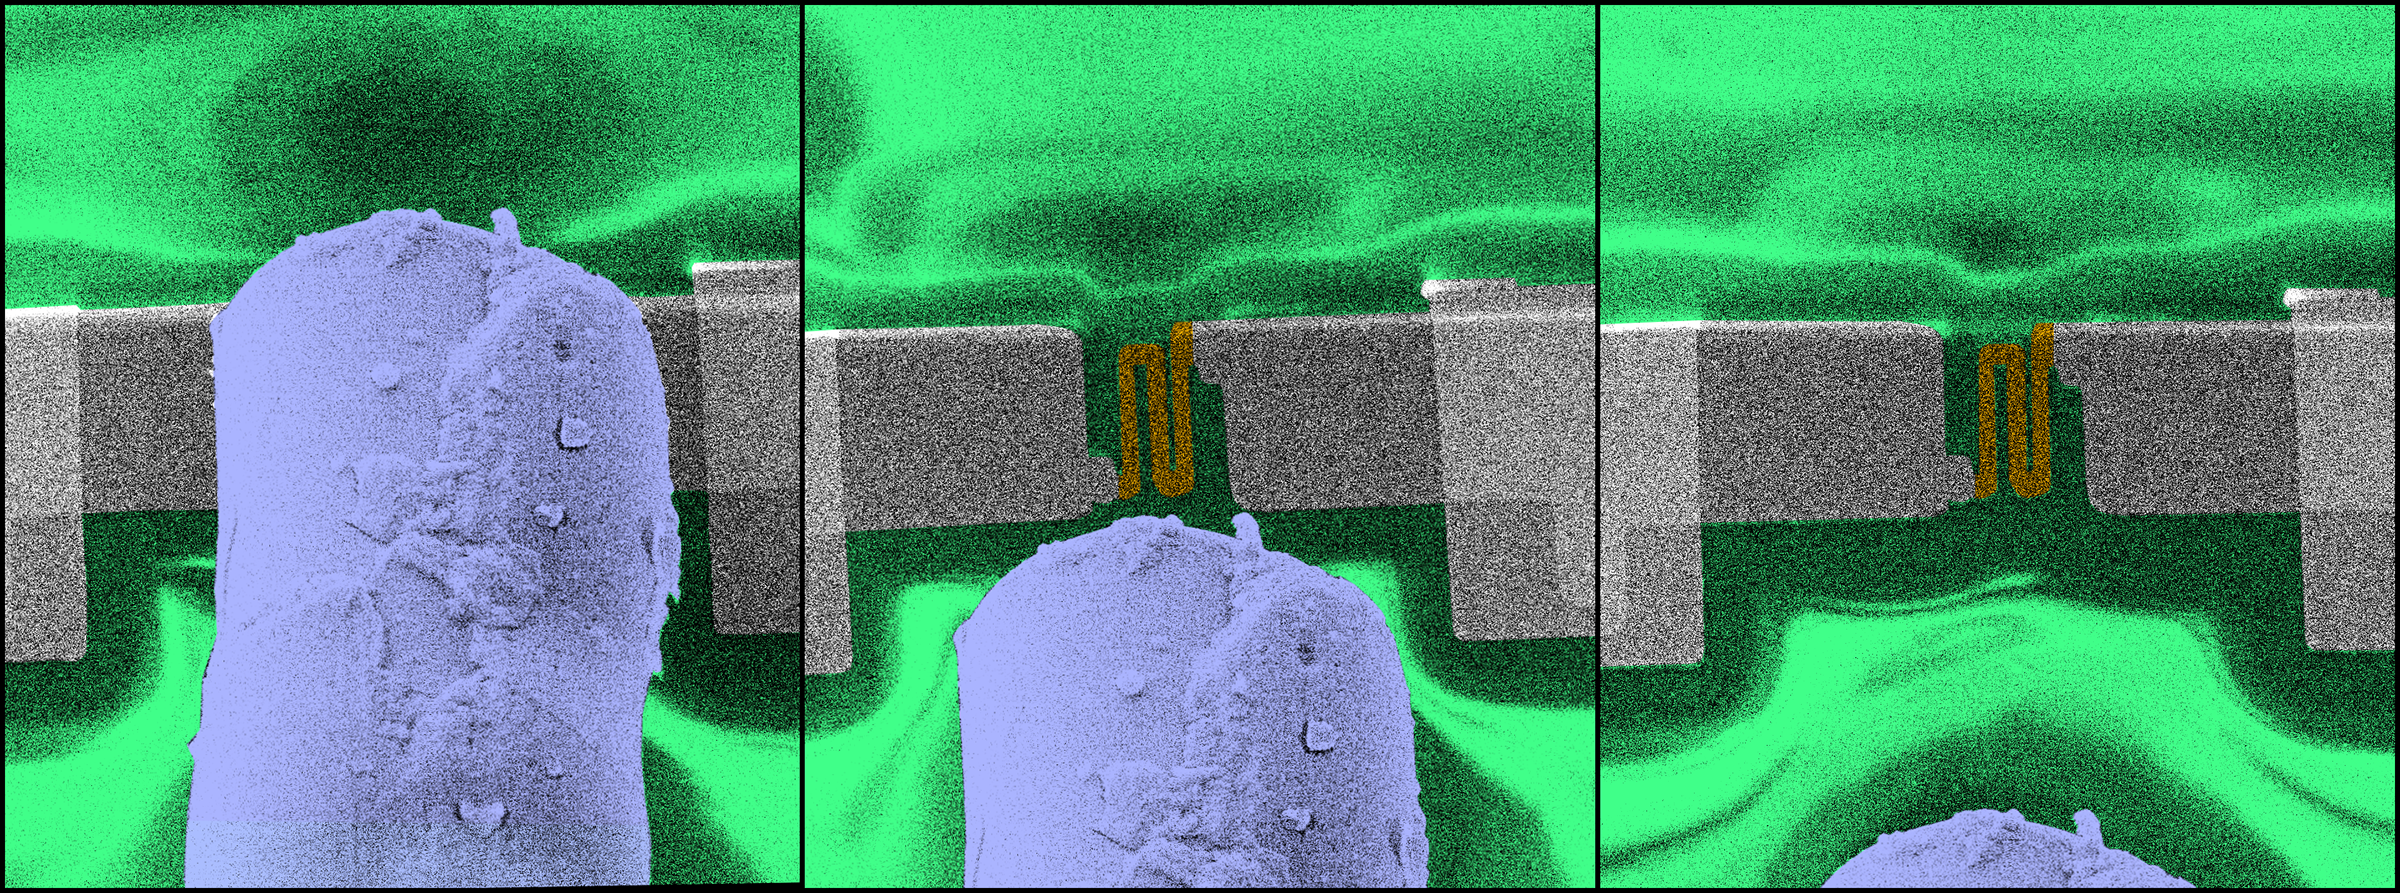 Colorized scanning electron microscope image shows the position of a resistive thermal device RTD (nanoscale thermometer) as the deposition substrate moves relative to the micro-size nozzle capillary for gas jet injection for mapping local temperature. The RTD thermal response was used for validation of the model prediction of the adatom non-equilibrium thermal state. (Credit: Matthew R. Henry)